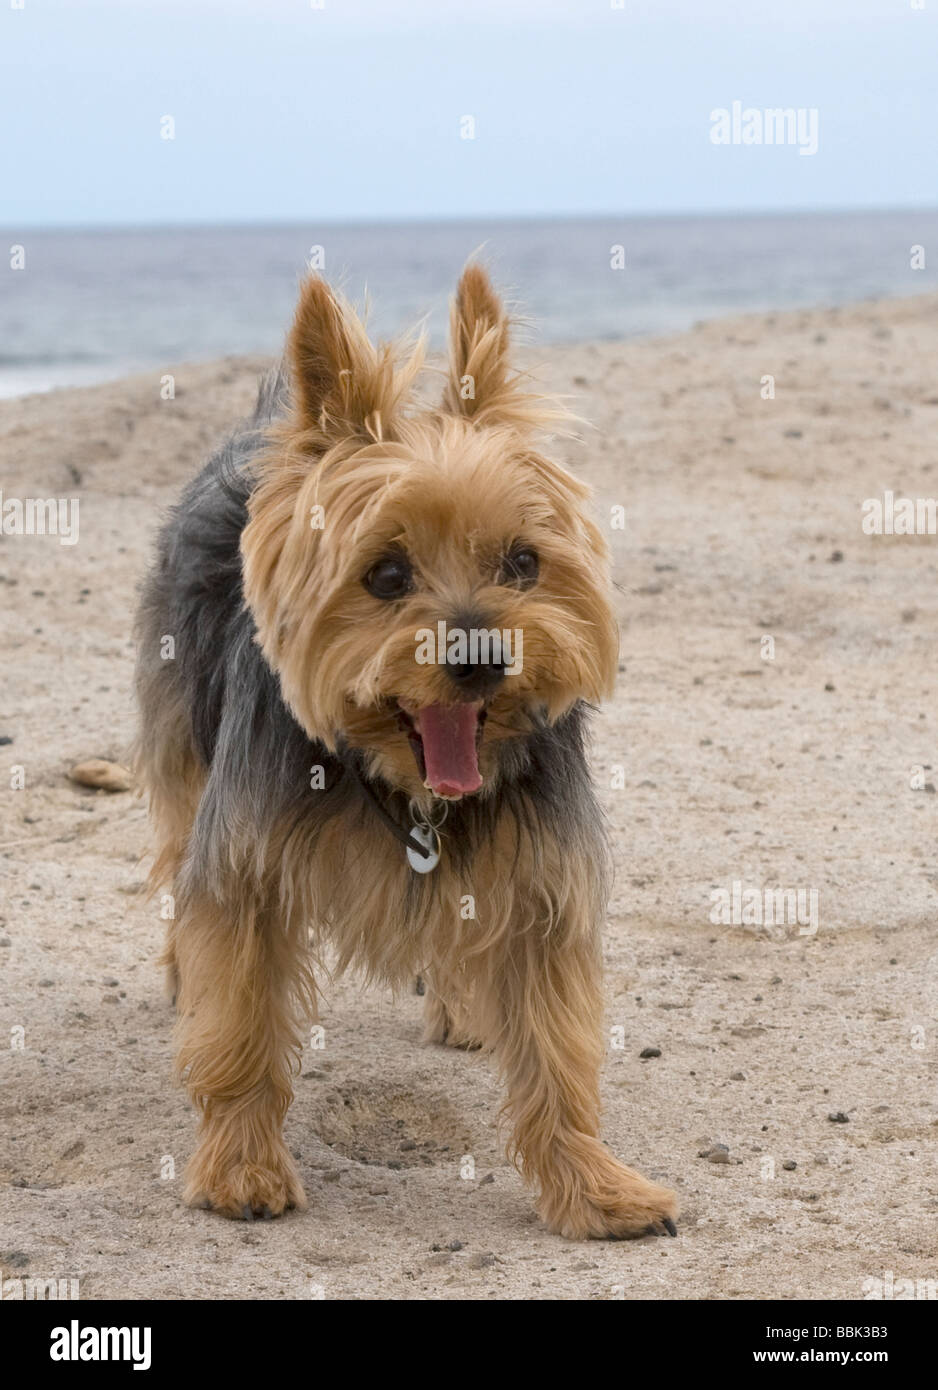 Yorkshire Terrier with funny expression, standing on beach Stock Photo